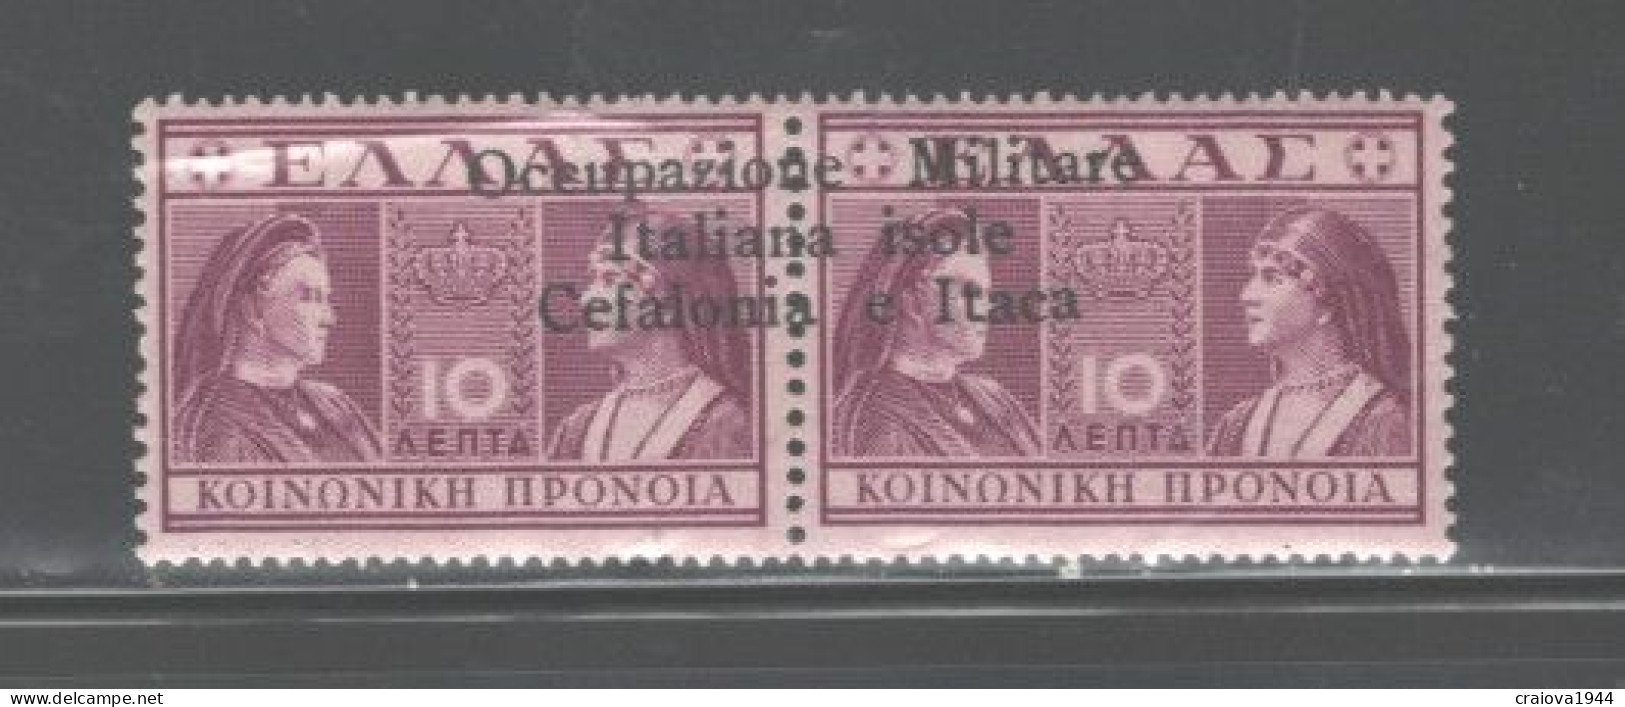 GREECE,1941"ISSUE FOR CEPHALONIA & ITHACA"#NR2a,Horz.OVPT. MNH, CERT. - Iles Ioniques